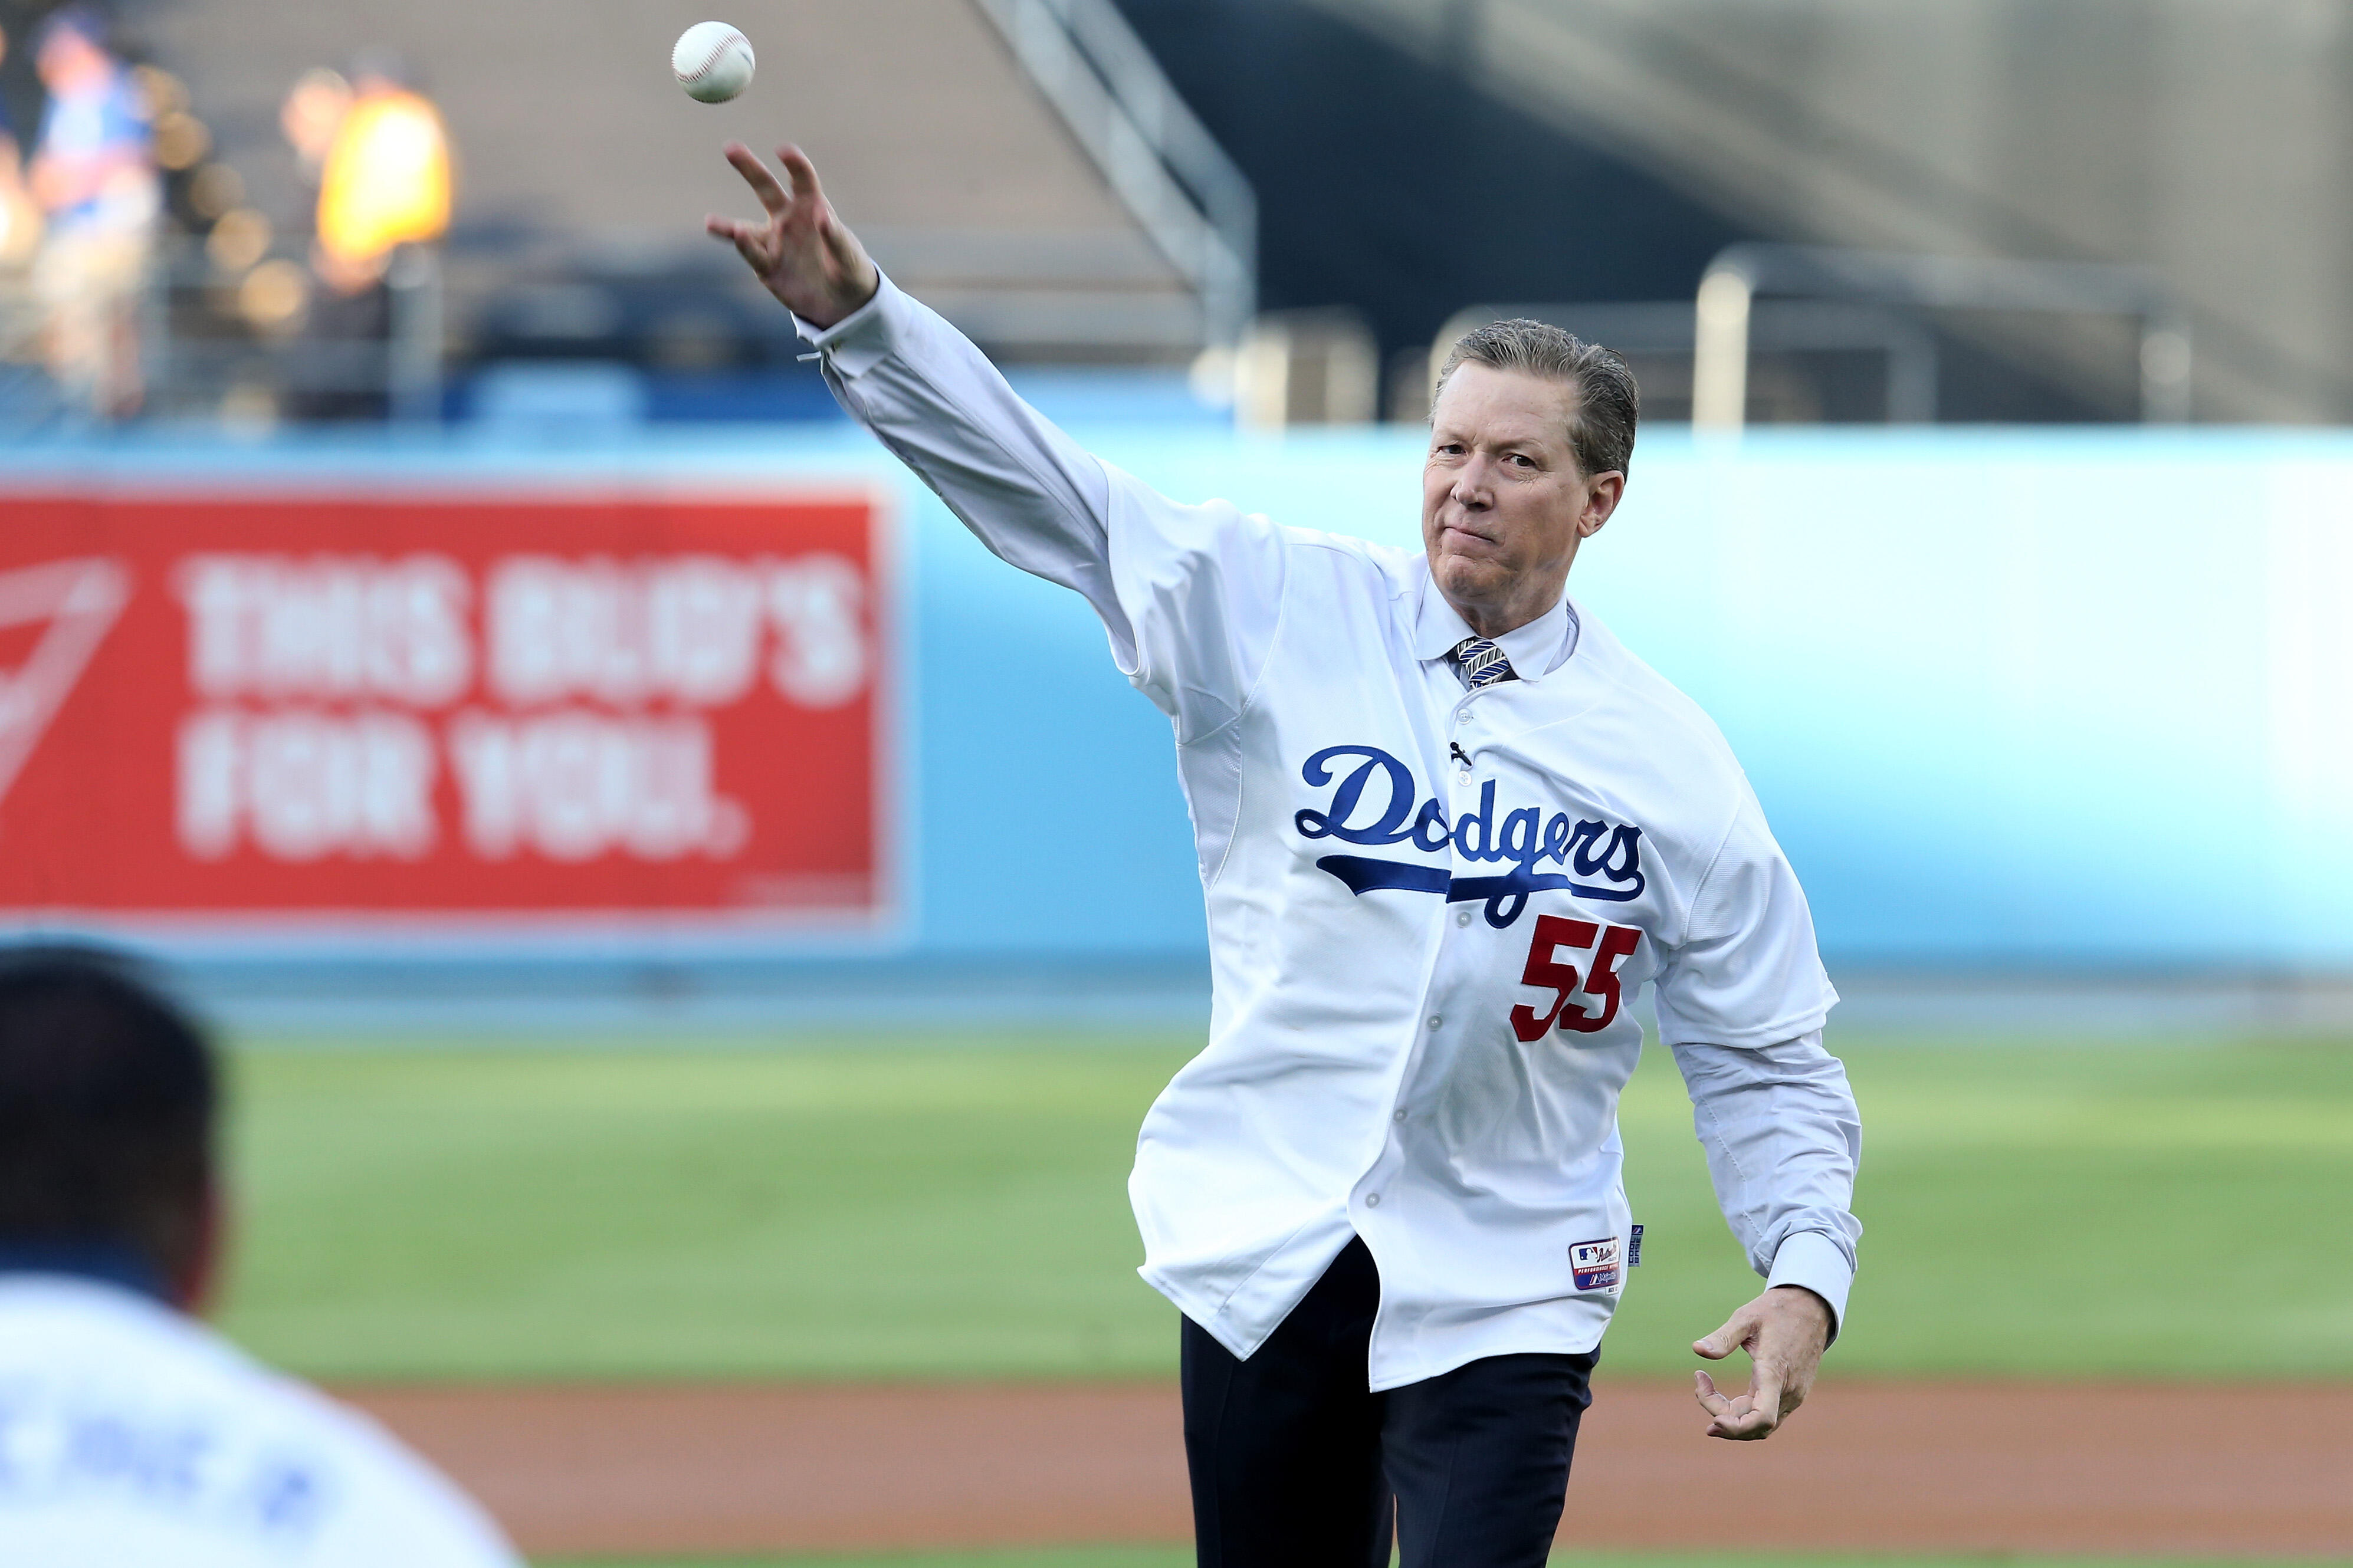 LOS ANGELES, CA - OCTOBER 15:  Los Angeles Dodgers legend Orel Hershiser throws out the ceremonial first pitch before the Dodgers take on the New York Mets in game five of the National League Division Series at Dodger Stadium on October 15, 2015 in Los An